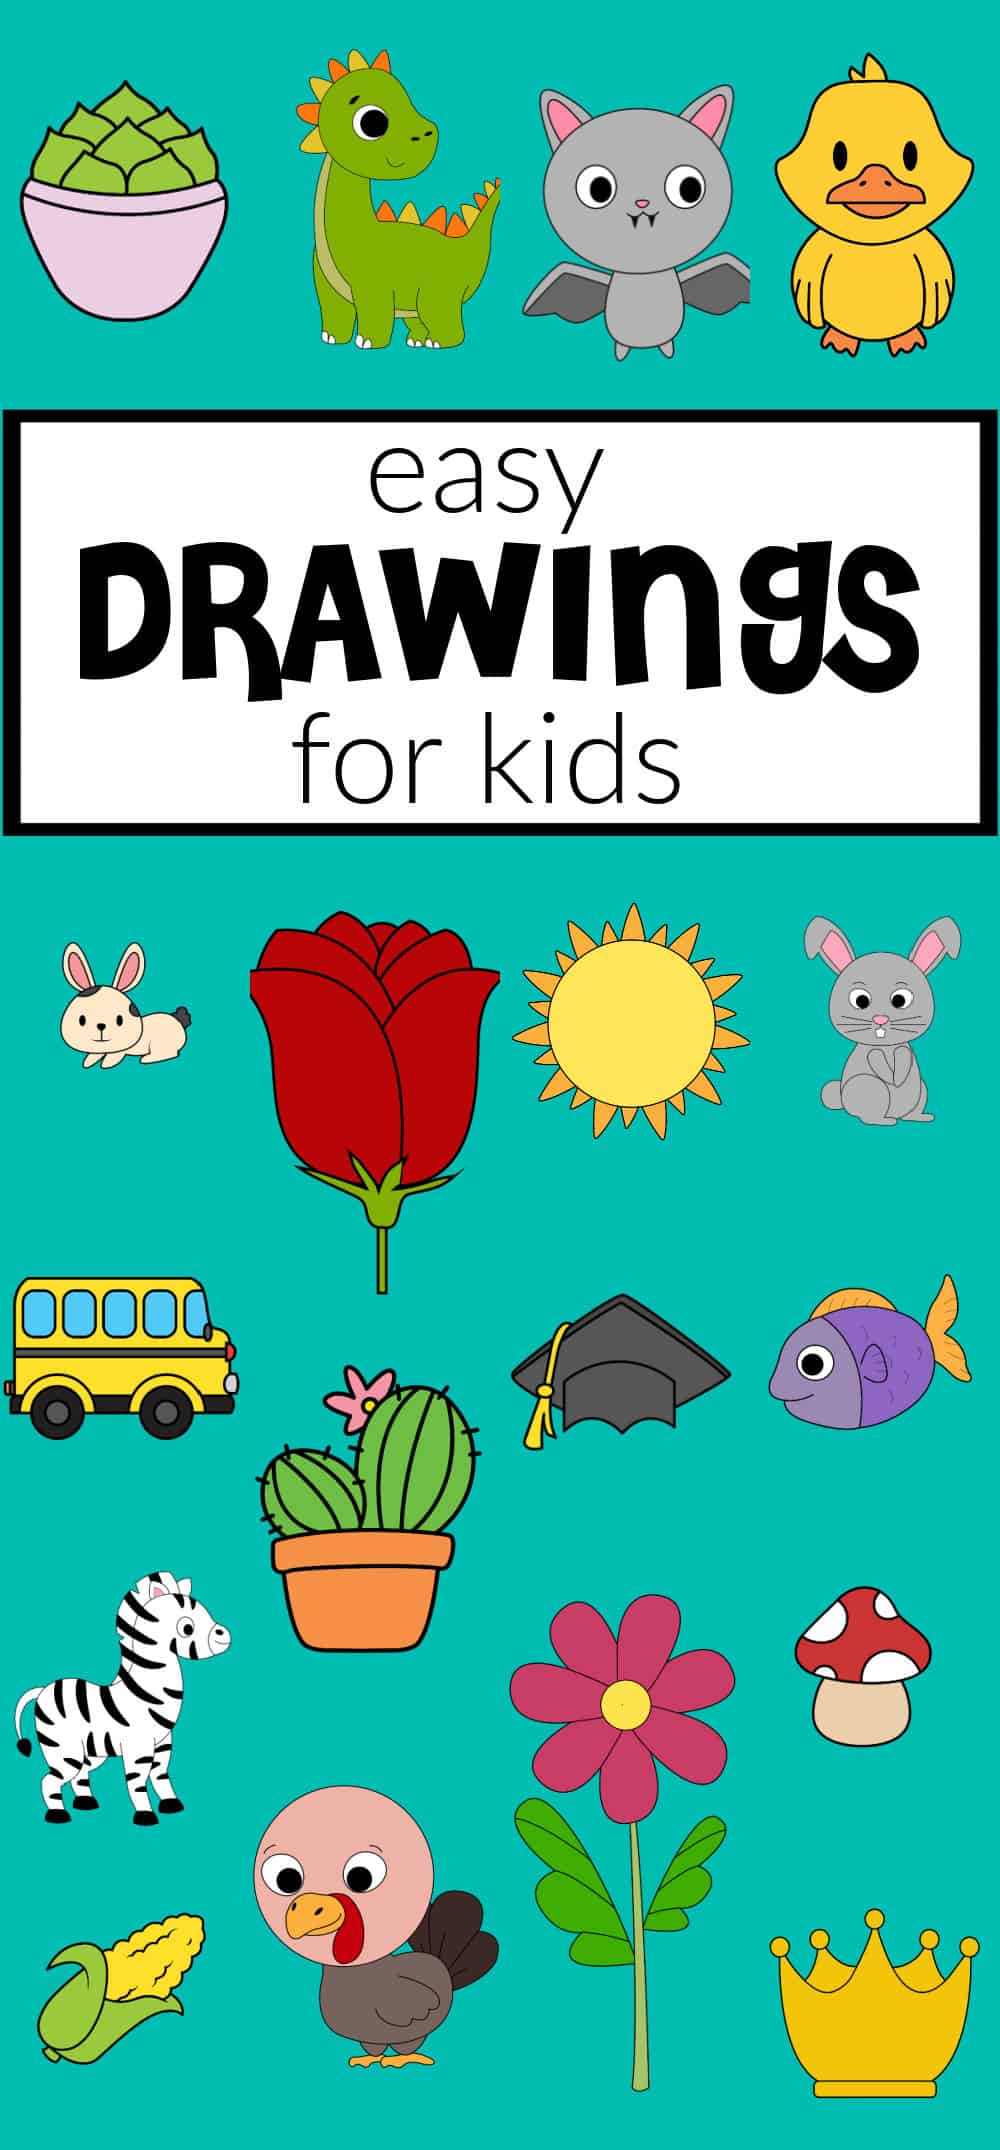 easy drawings to draw for kids